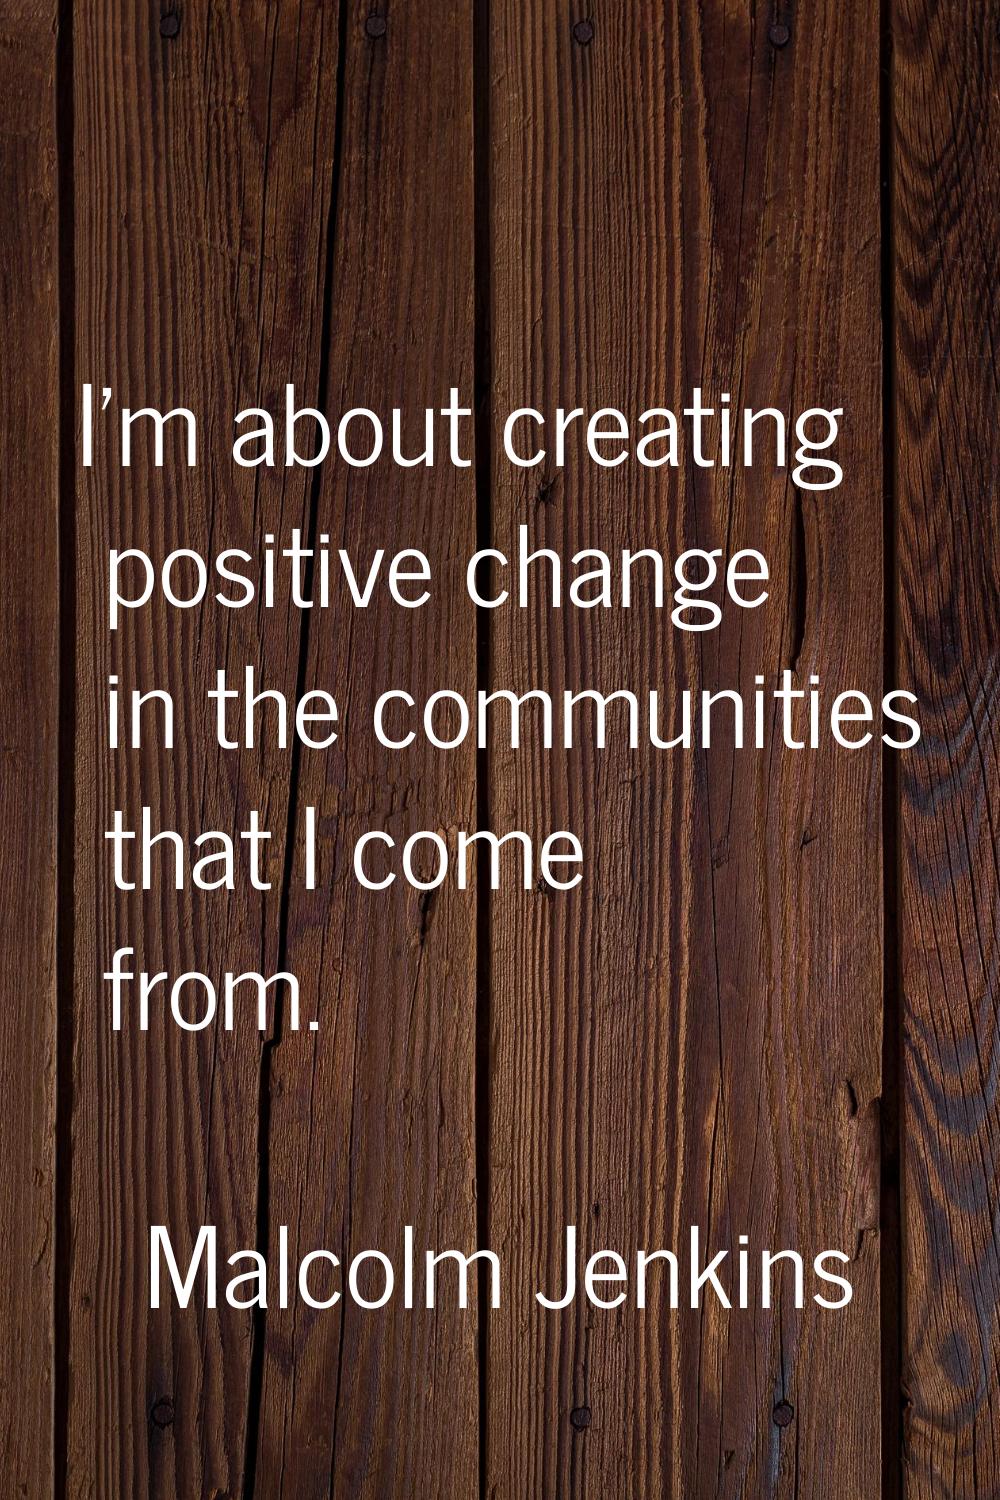 I'm about creating positive change in the communities that I come from.